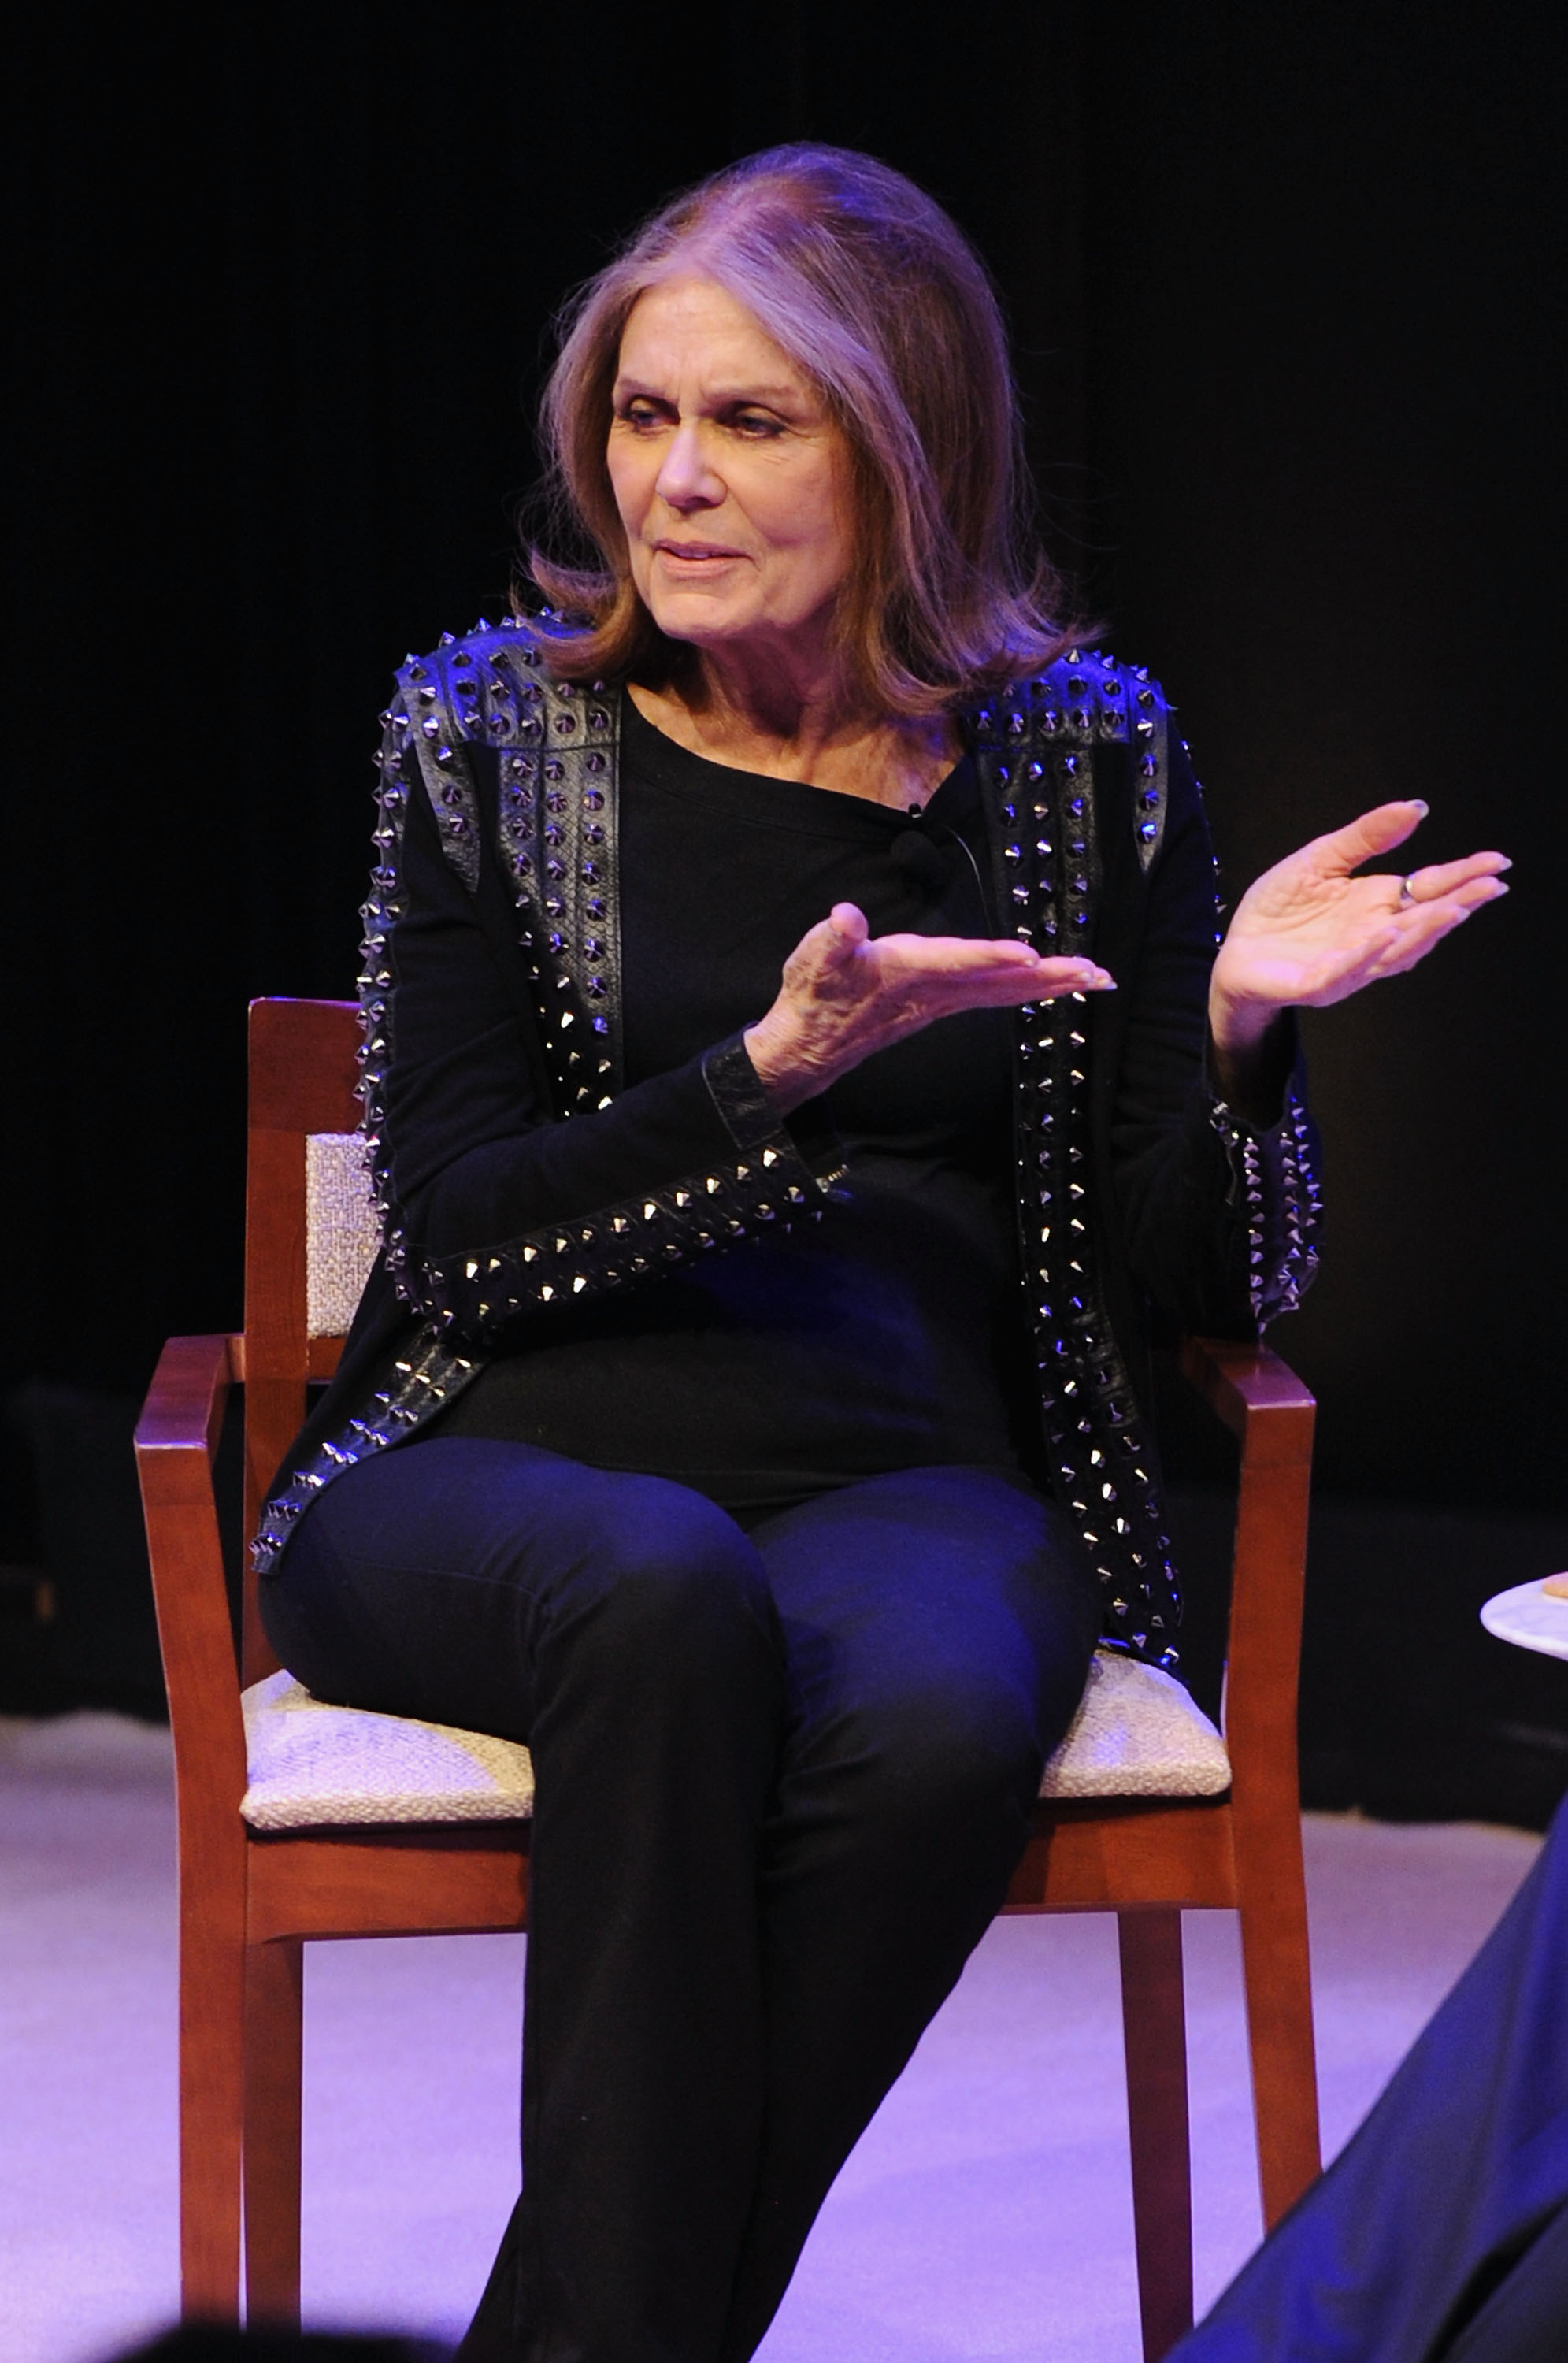 Activist and correspondent at VICE, Gloria Steinem speaks onstage during the VICELAND New York premiere screening of Gloria Steinem's "Woman" in New York City on May 4, 2016. (Craig Barritt&mdash;Getty Images for VICE Media, LLC)